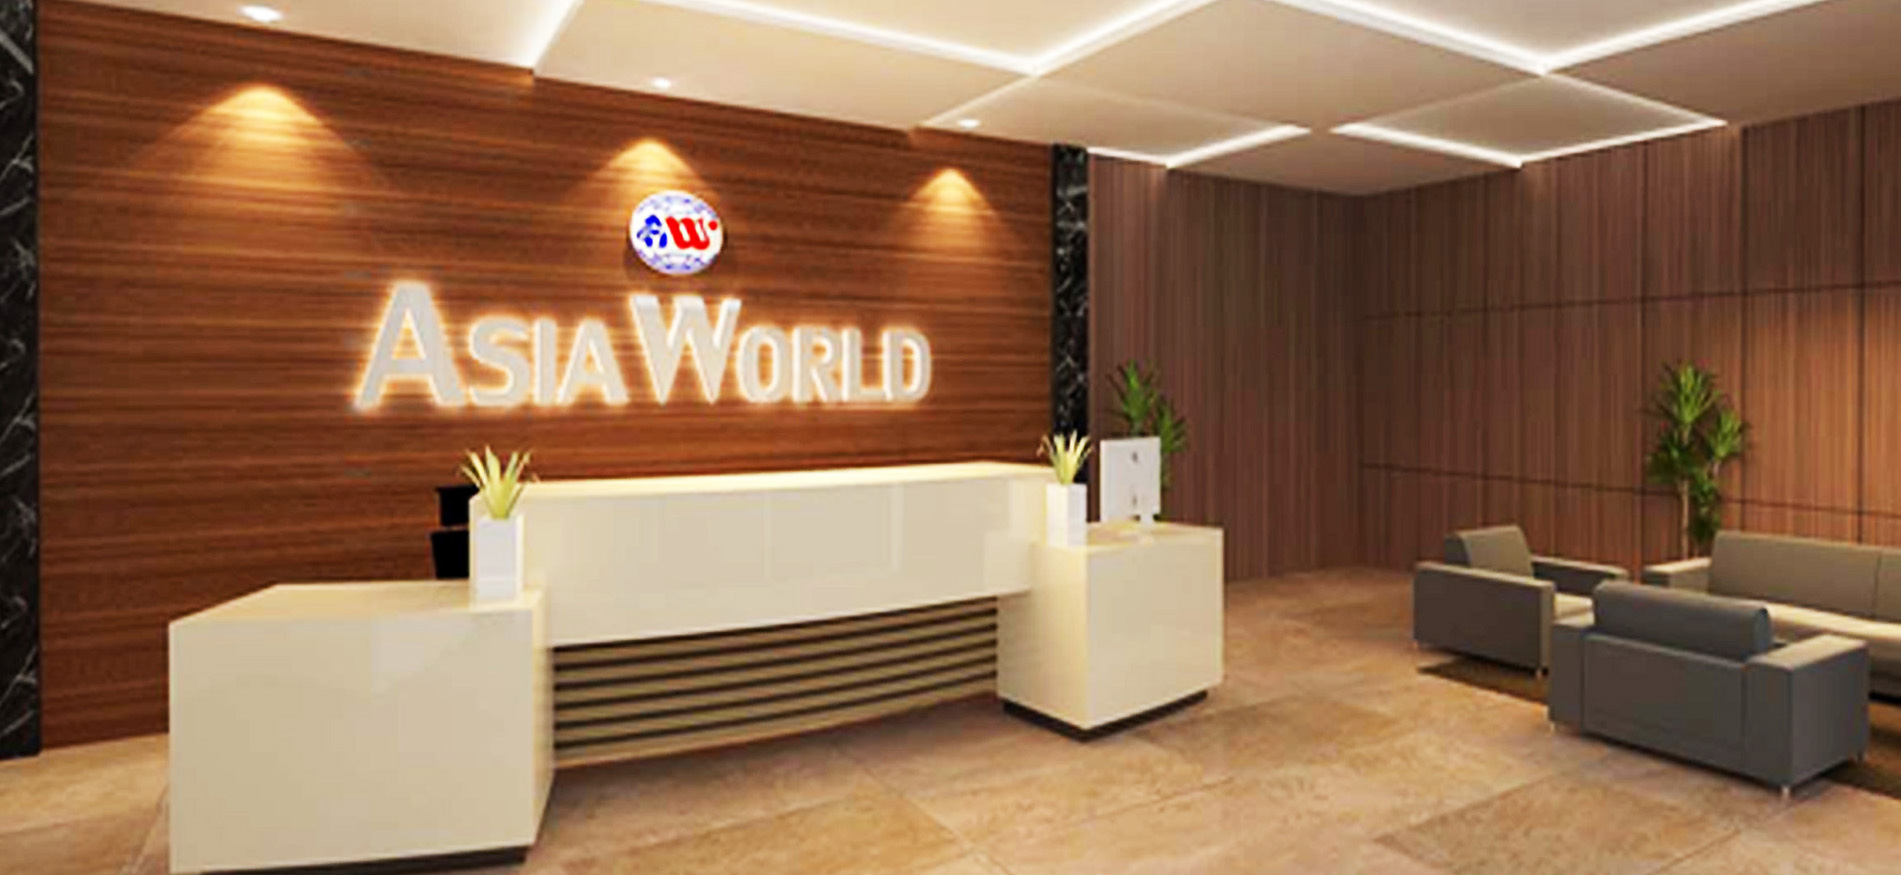 Proposal for Asia World Office